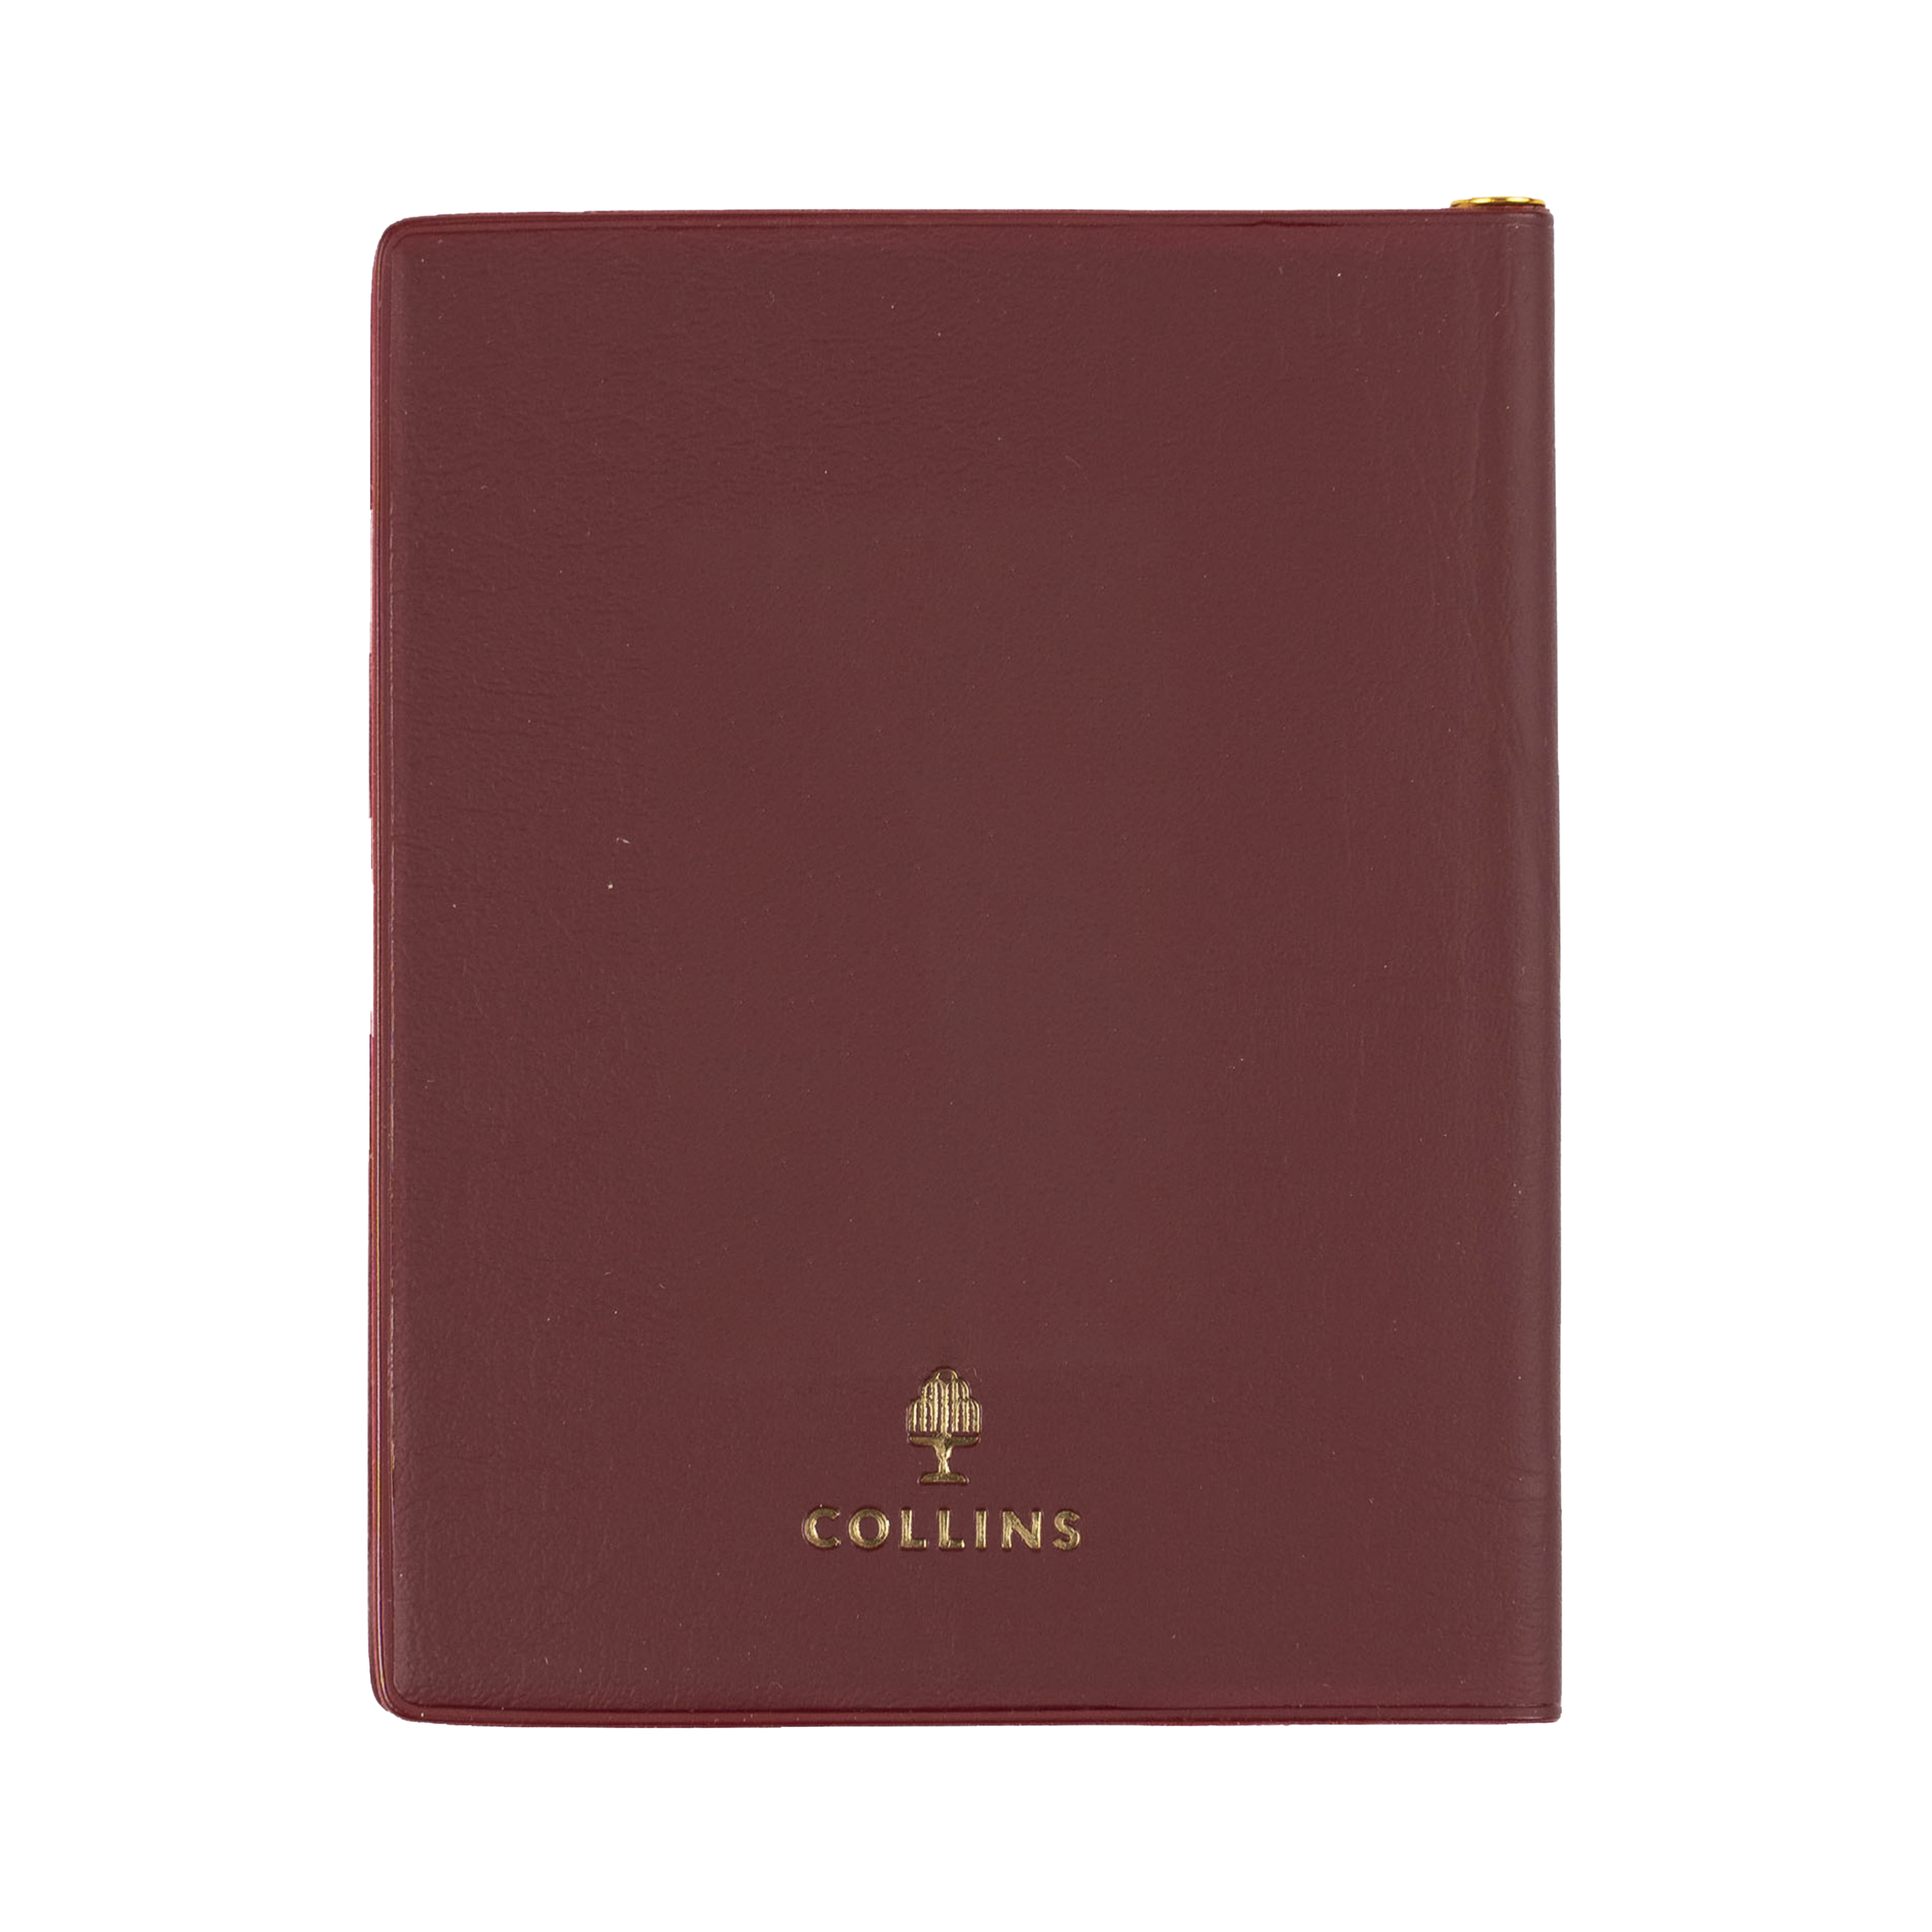 Belmont Pocket 2024 Diary - Week to View with Pencil, Size A7 Burgundy / A7 (105 x 74mm)